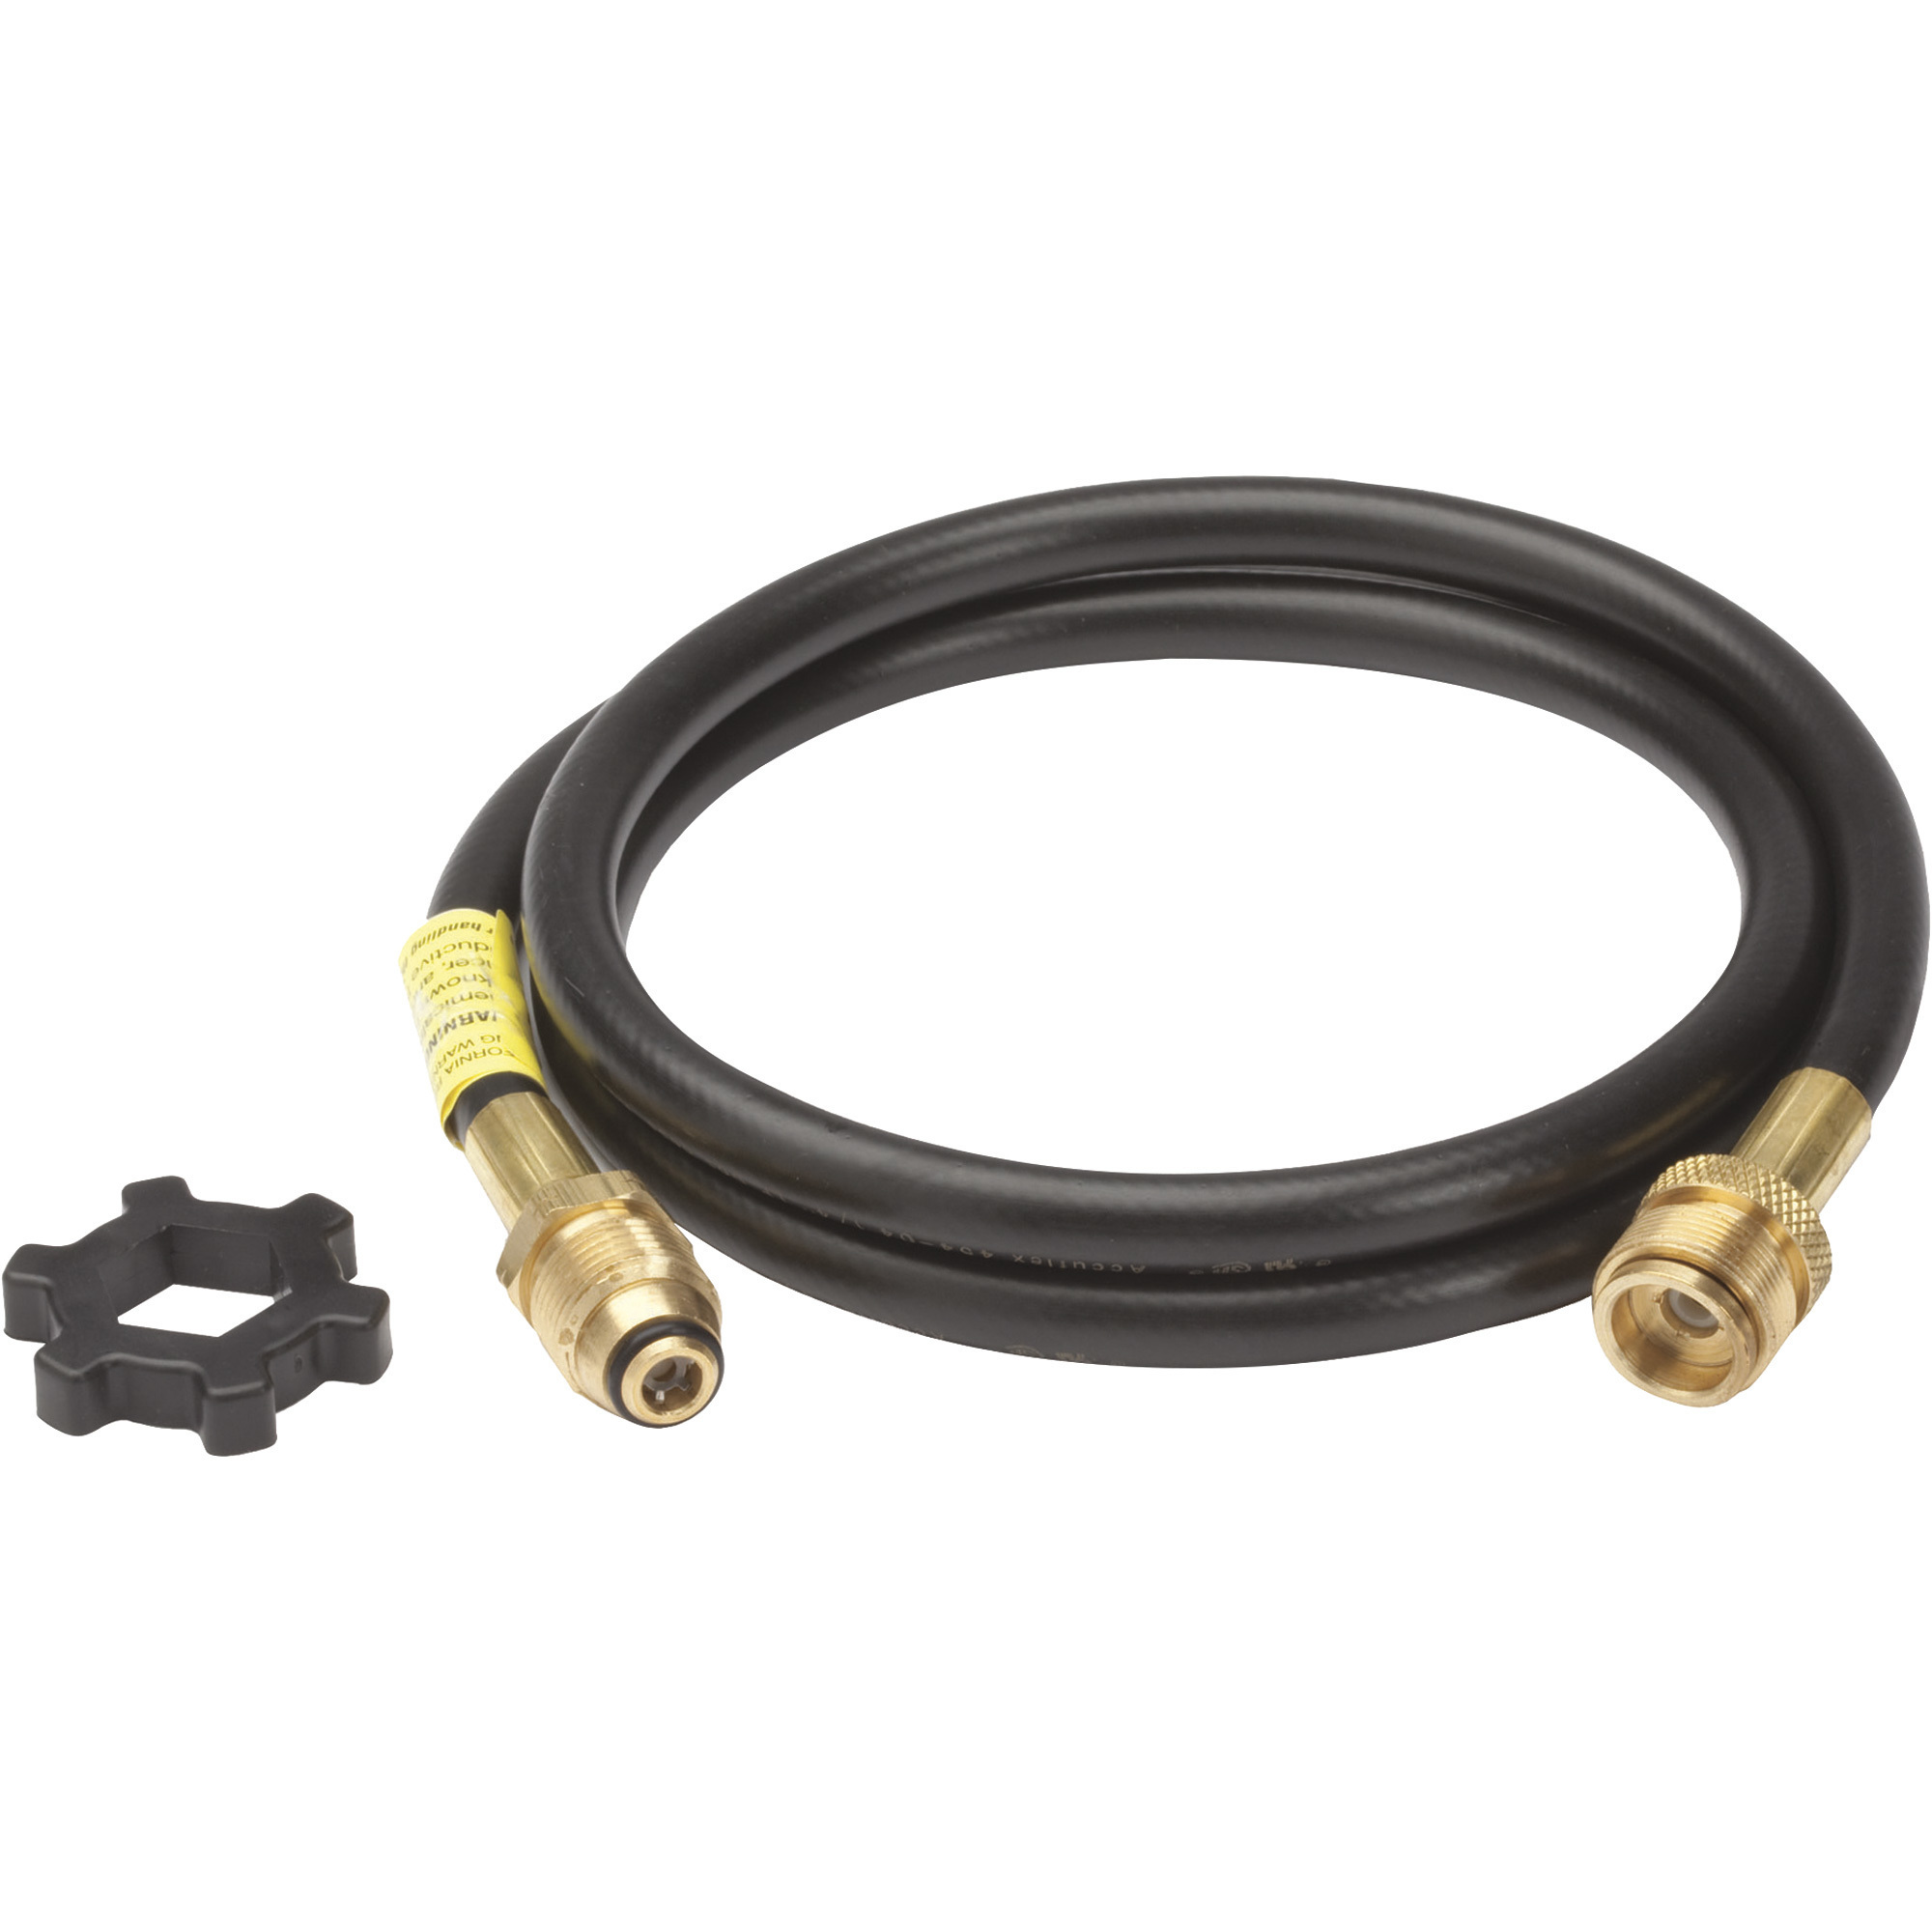 Mr. Heater Hose Connection For Buddy Heaters, 5ft. Length, Model F273701